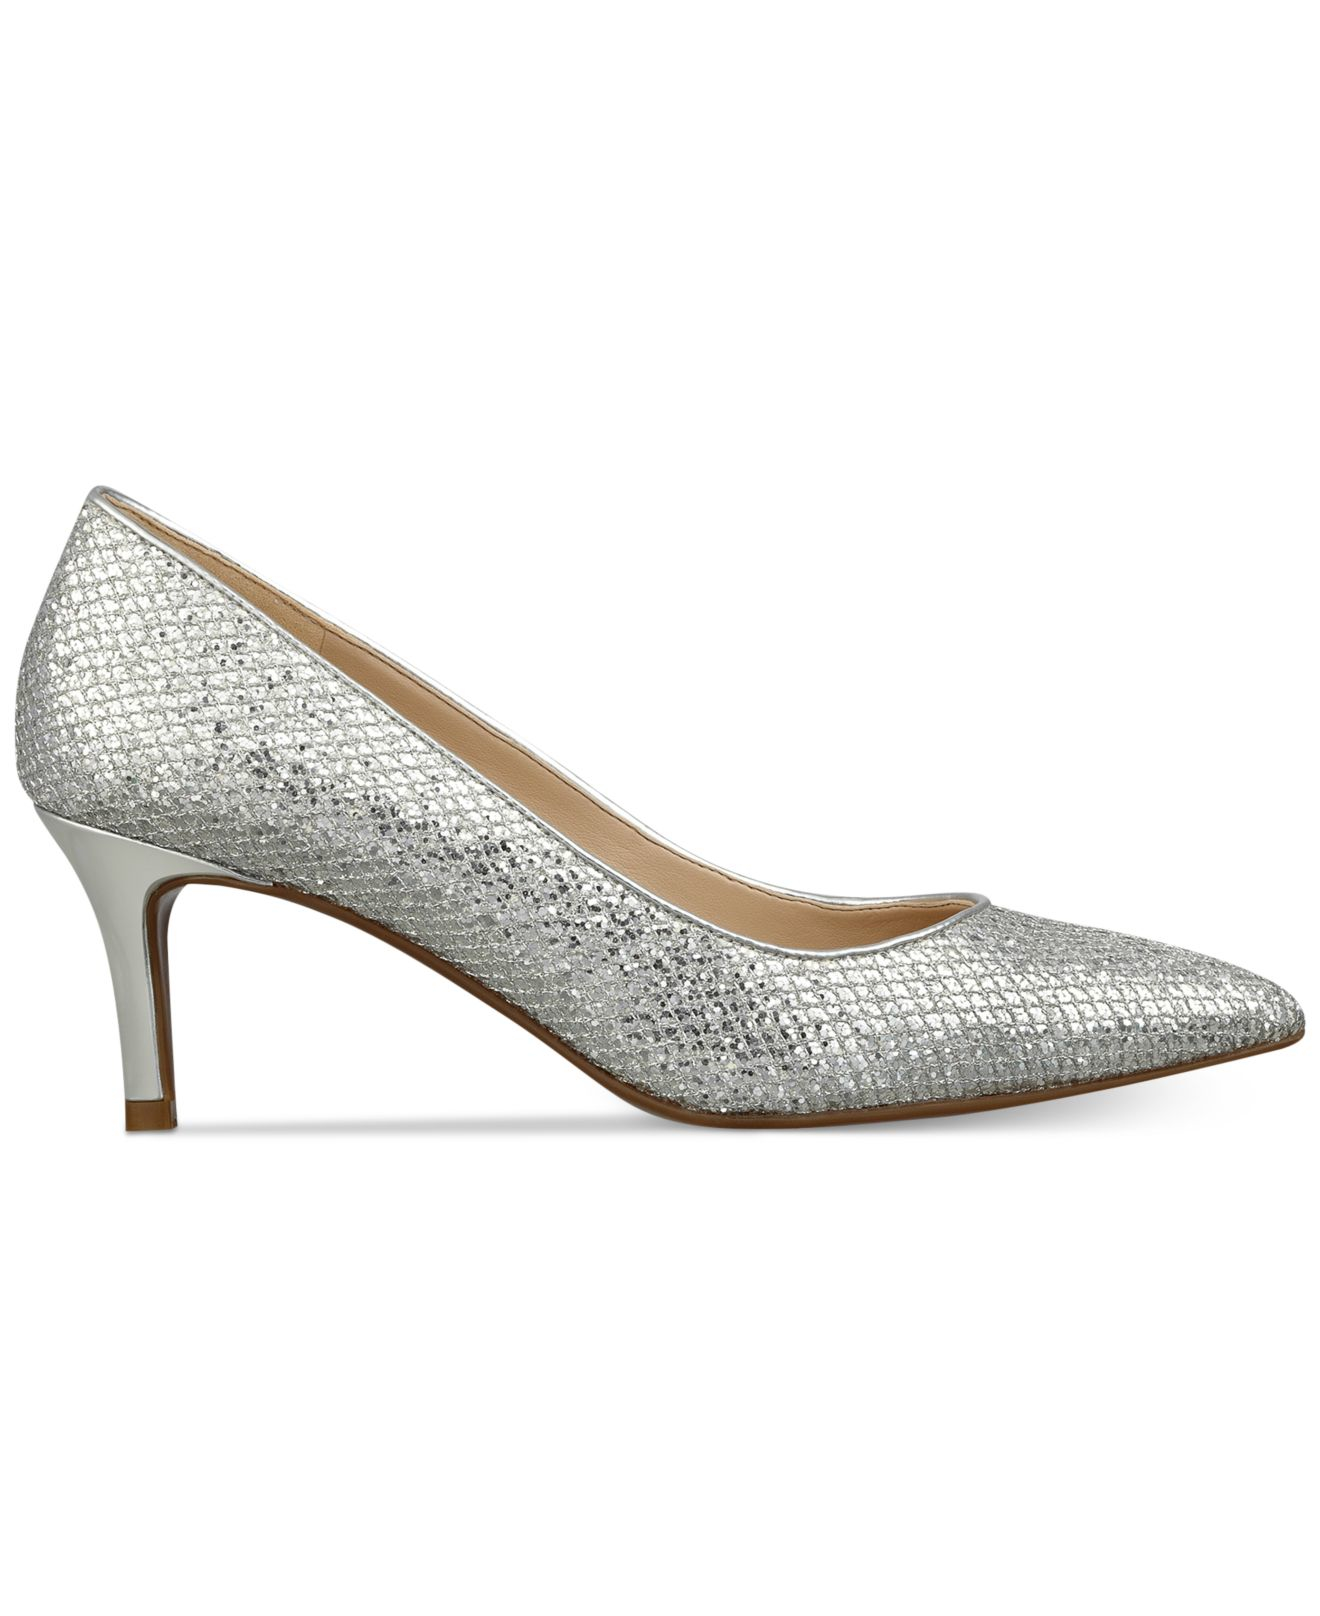 Marc Fisher Milee Pumps in Silver 